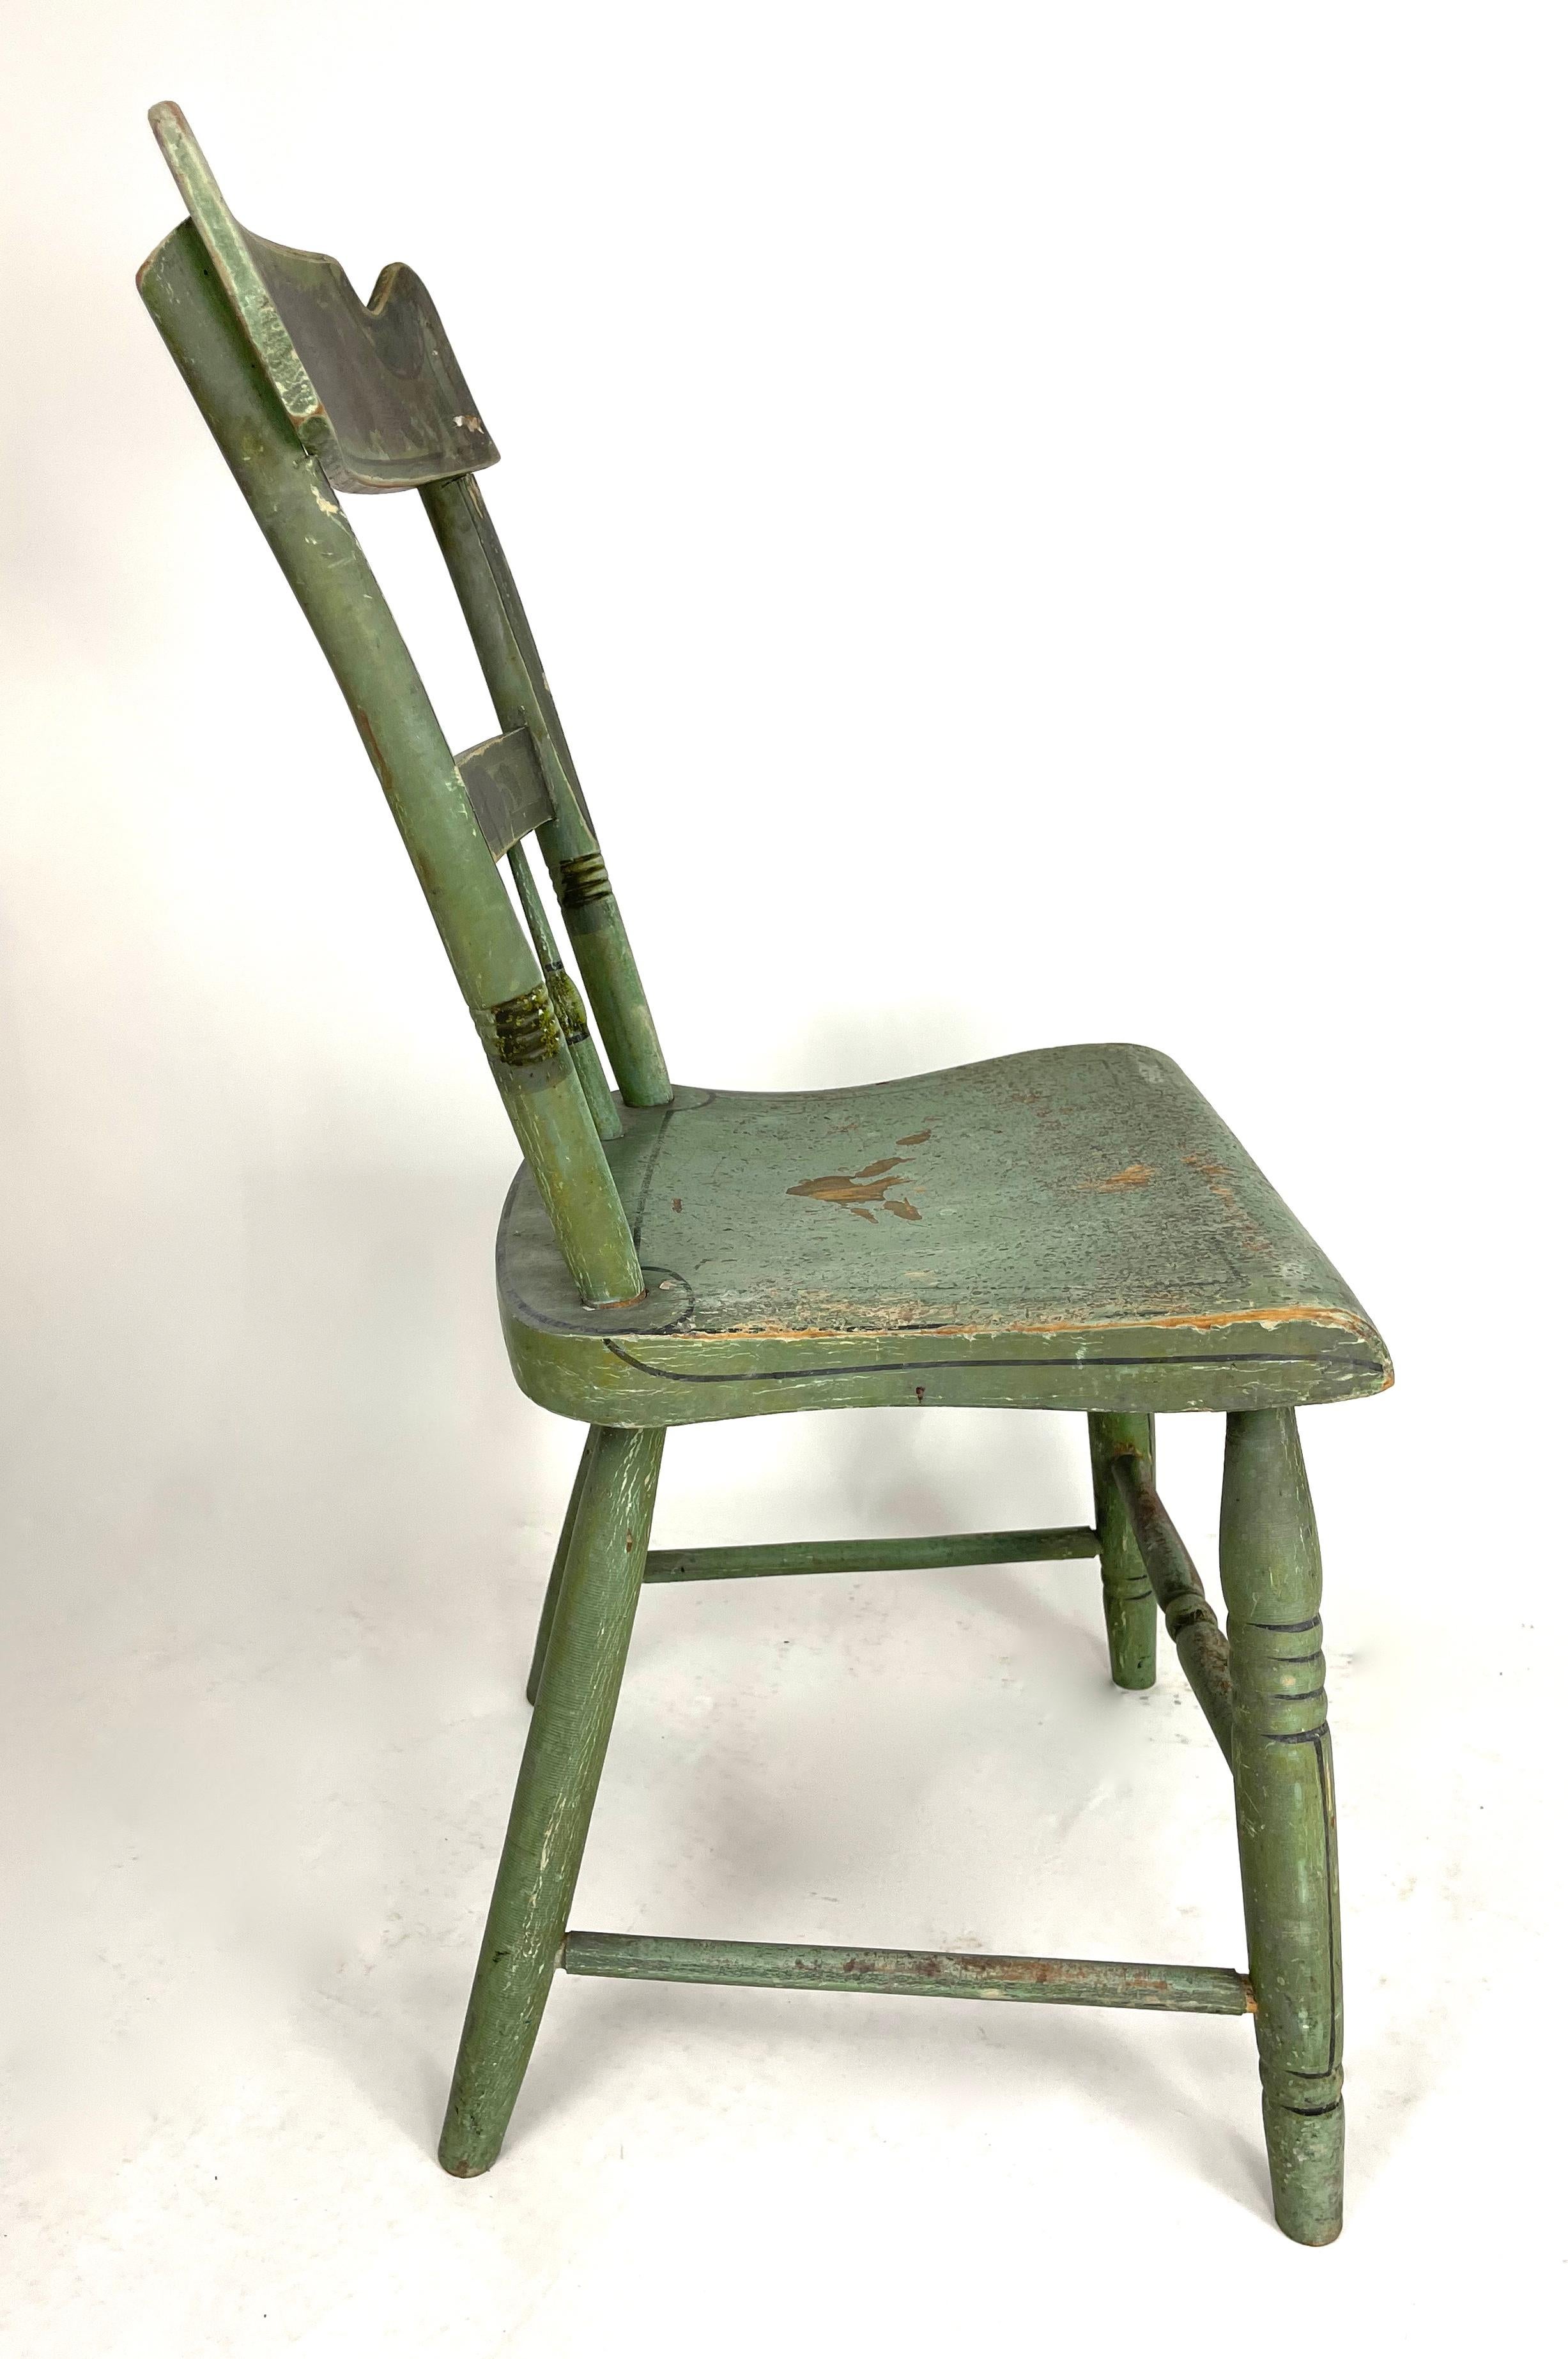 Hand-Painted Set of 6 19th Century American Country Green Painted Dining Chairs, c. 1820-30